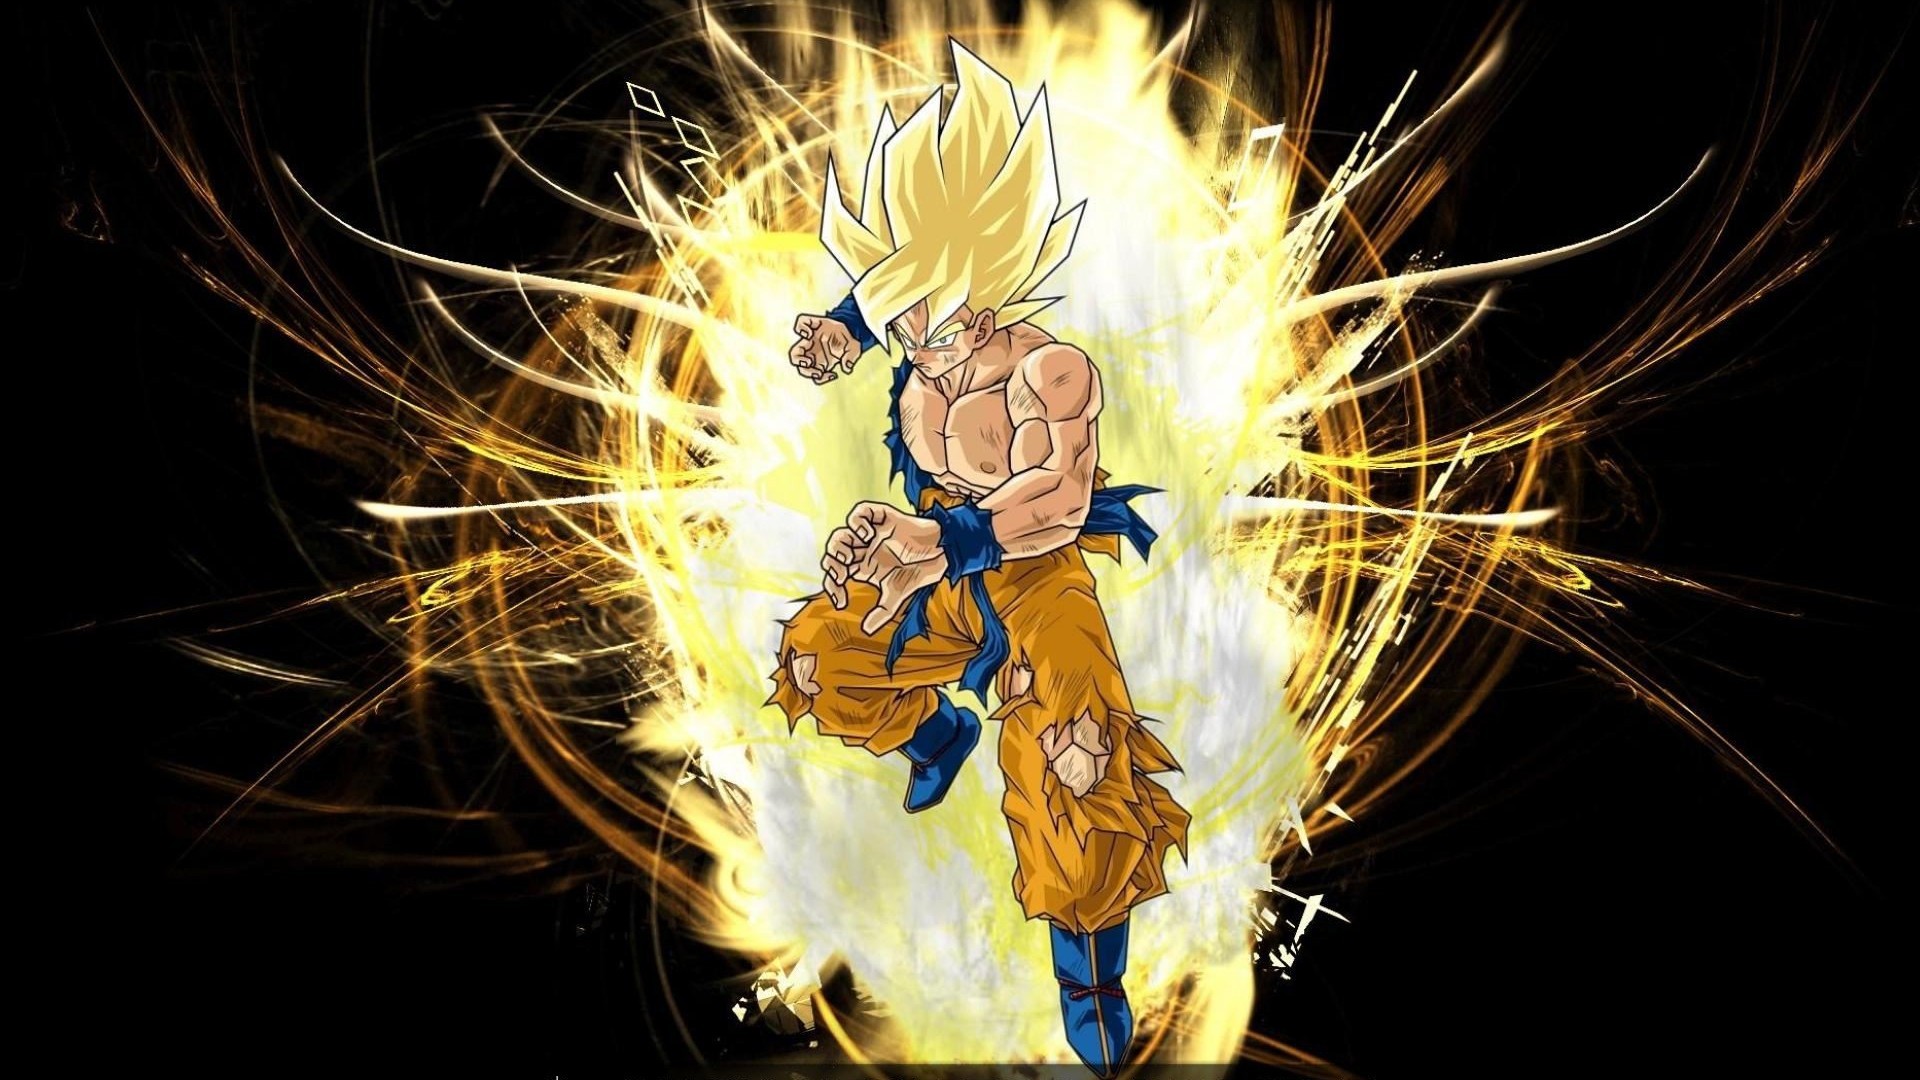 Wallpaper HD Goku Super Saiyan with image resolution 1920x1080 pixel. You can make this wallpaper for your Desktop Computer Backgrounds, Mac Wallpapers, Android Lock screen or iPhone Screensavers